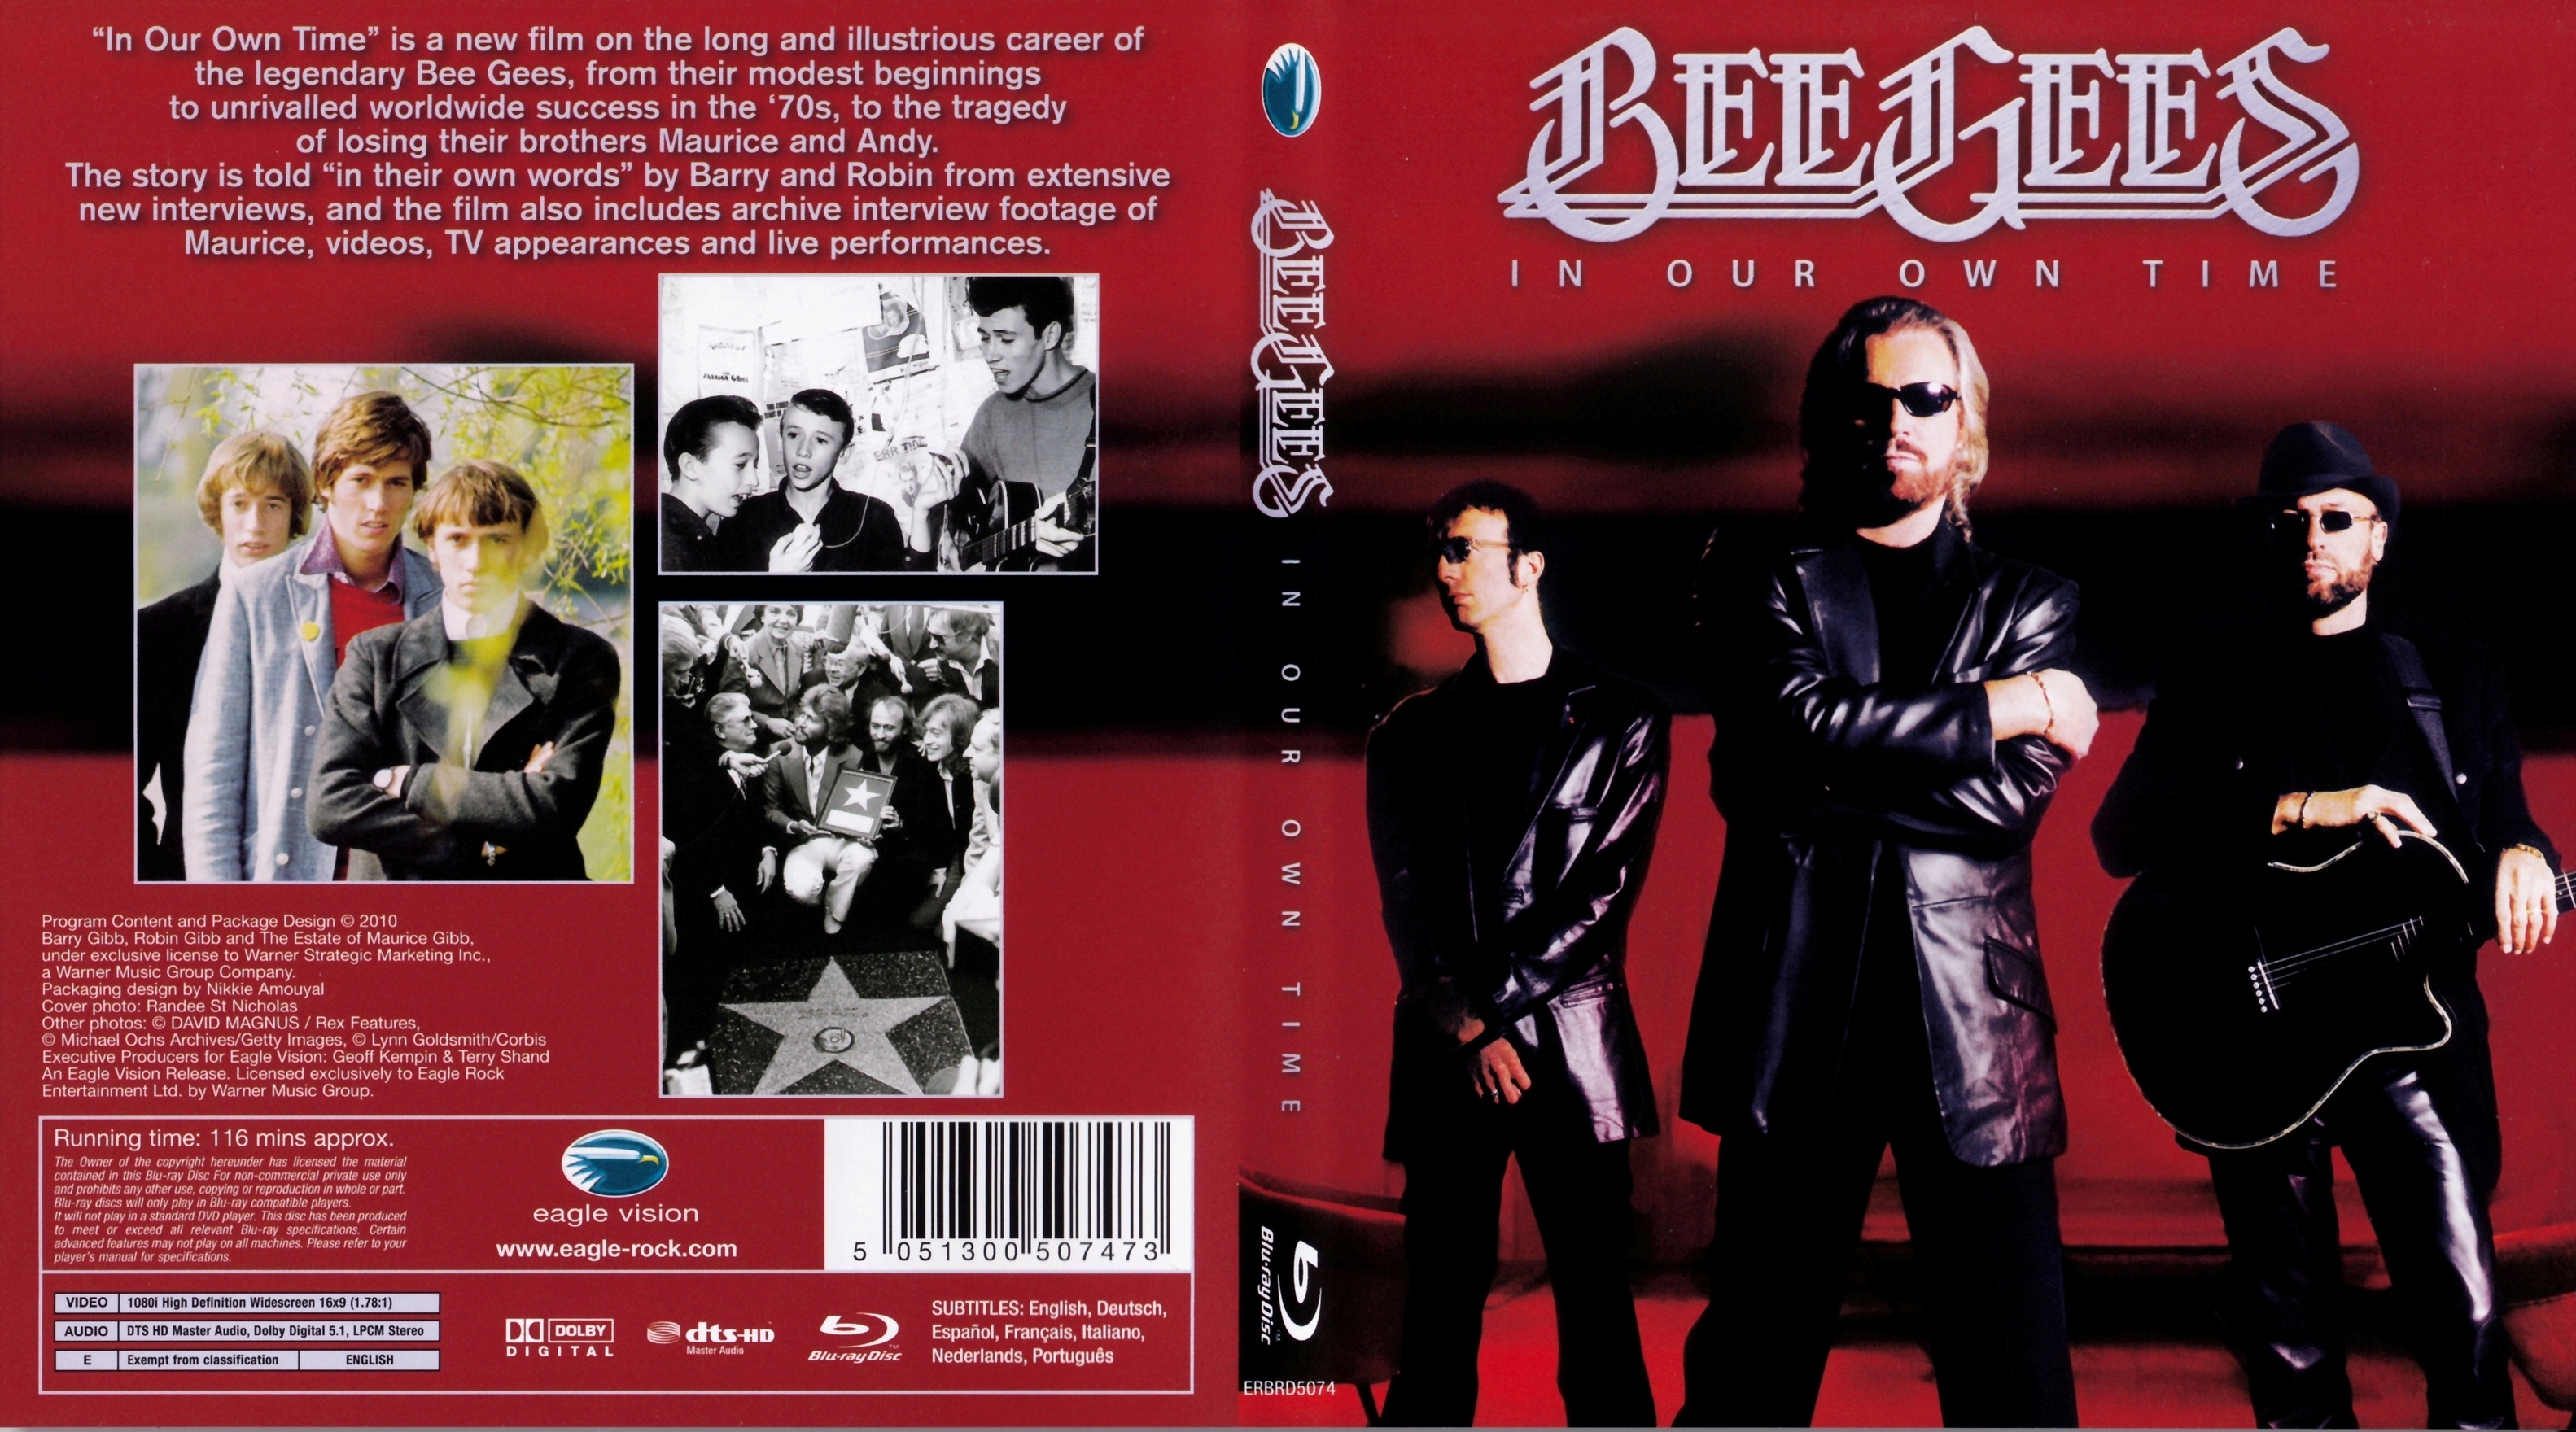 Jaquette DVD Bee Gees In our own time (BLU-RAY)